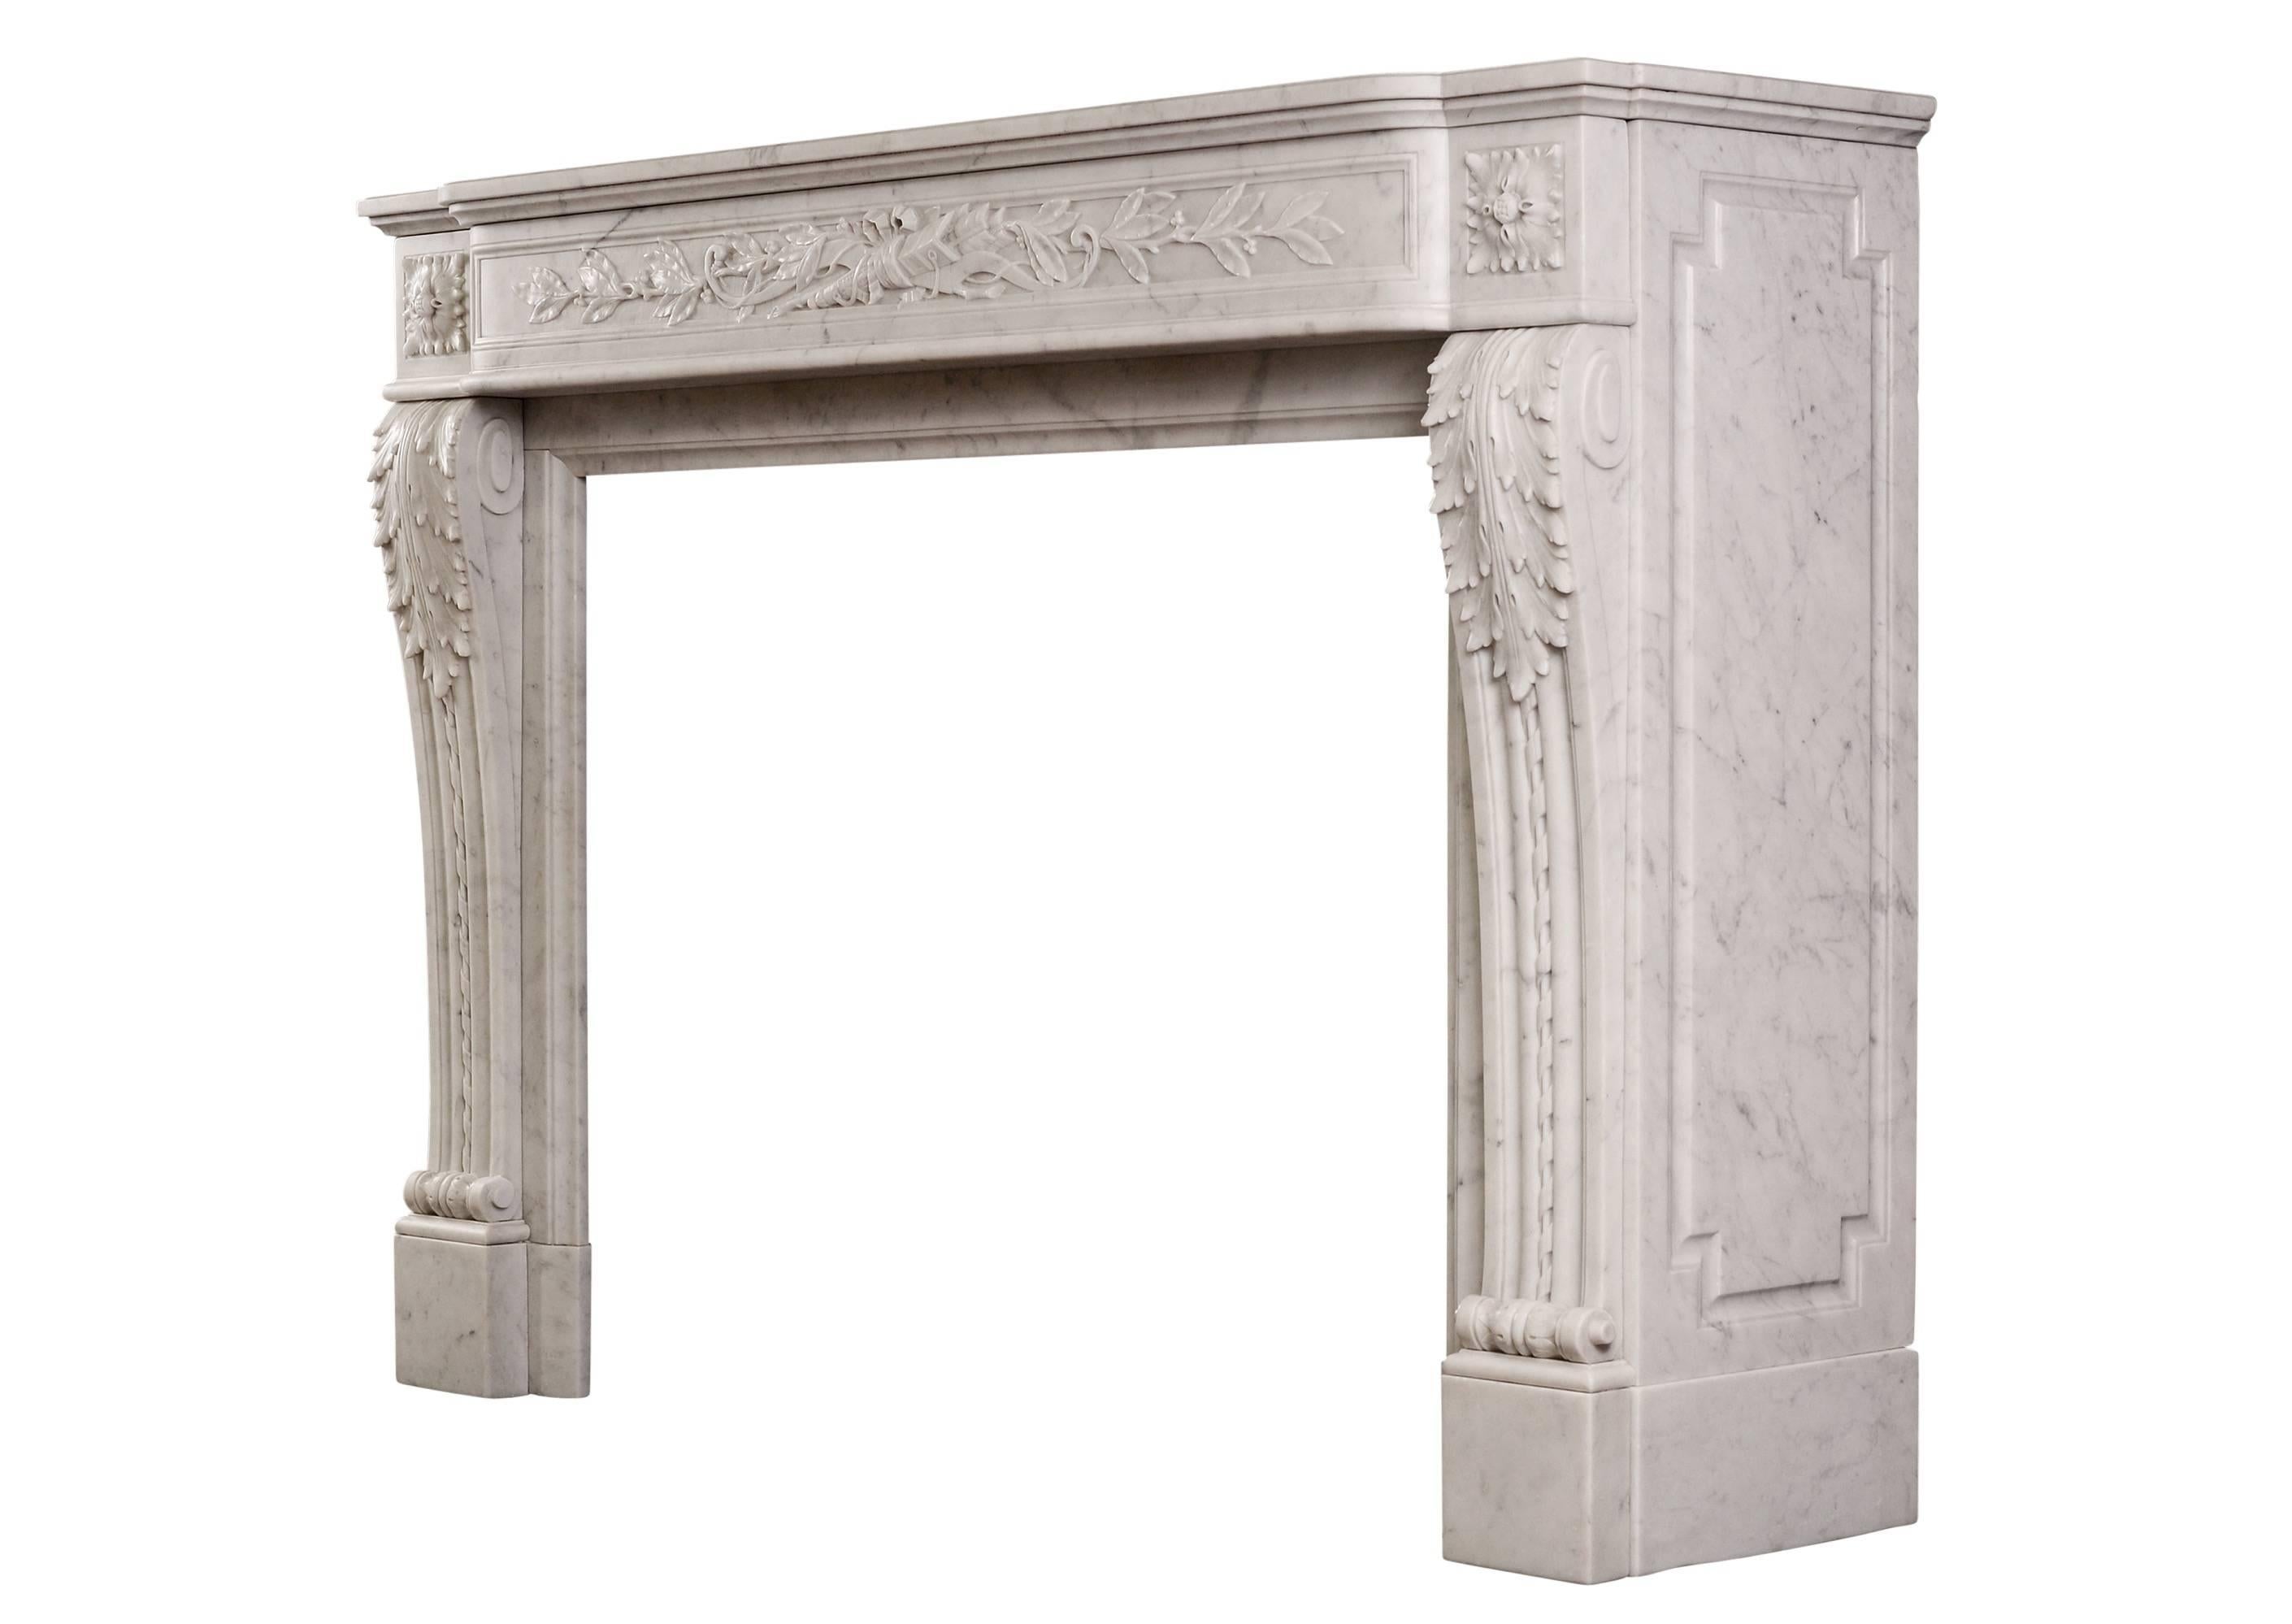 A mid-19th century French Louis XVI style Carrara marble fireplace, with panelled frieze delicately carved with quiver, arrow and foliage. The shaped jambs with acanthus leaves, rope moulding and square paterae above. Moulded